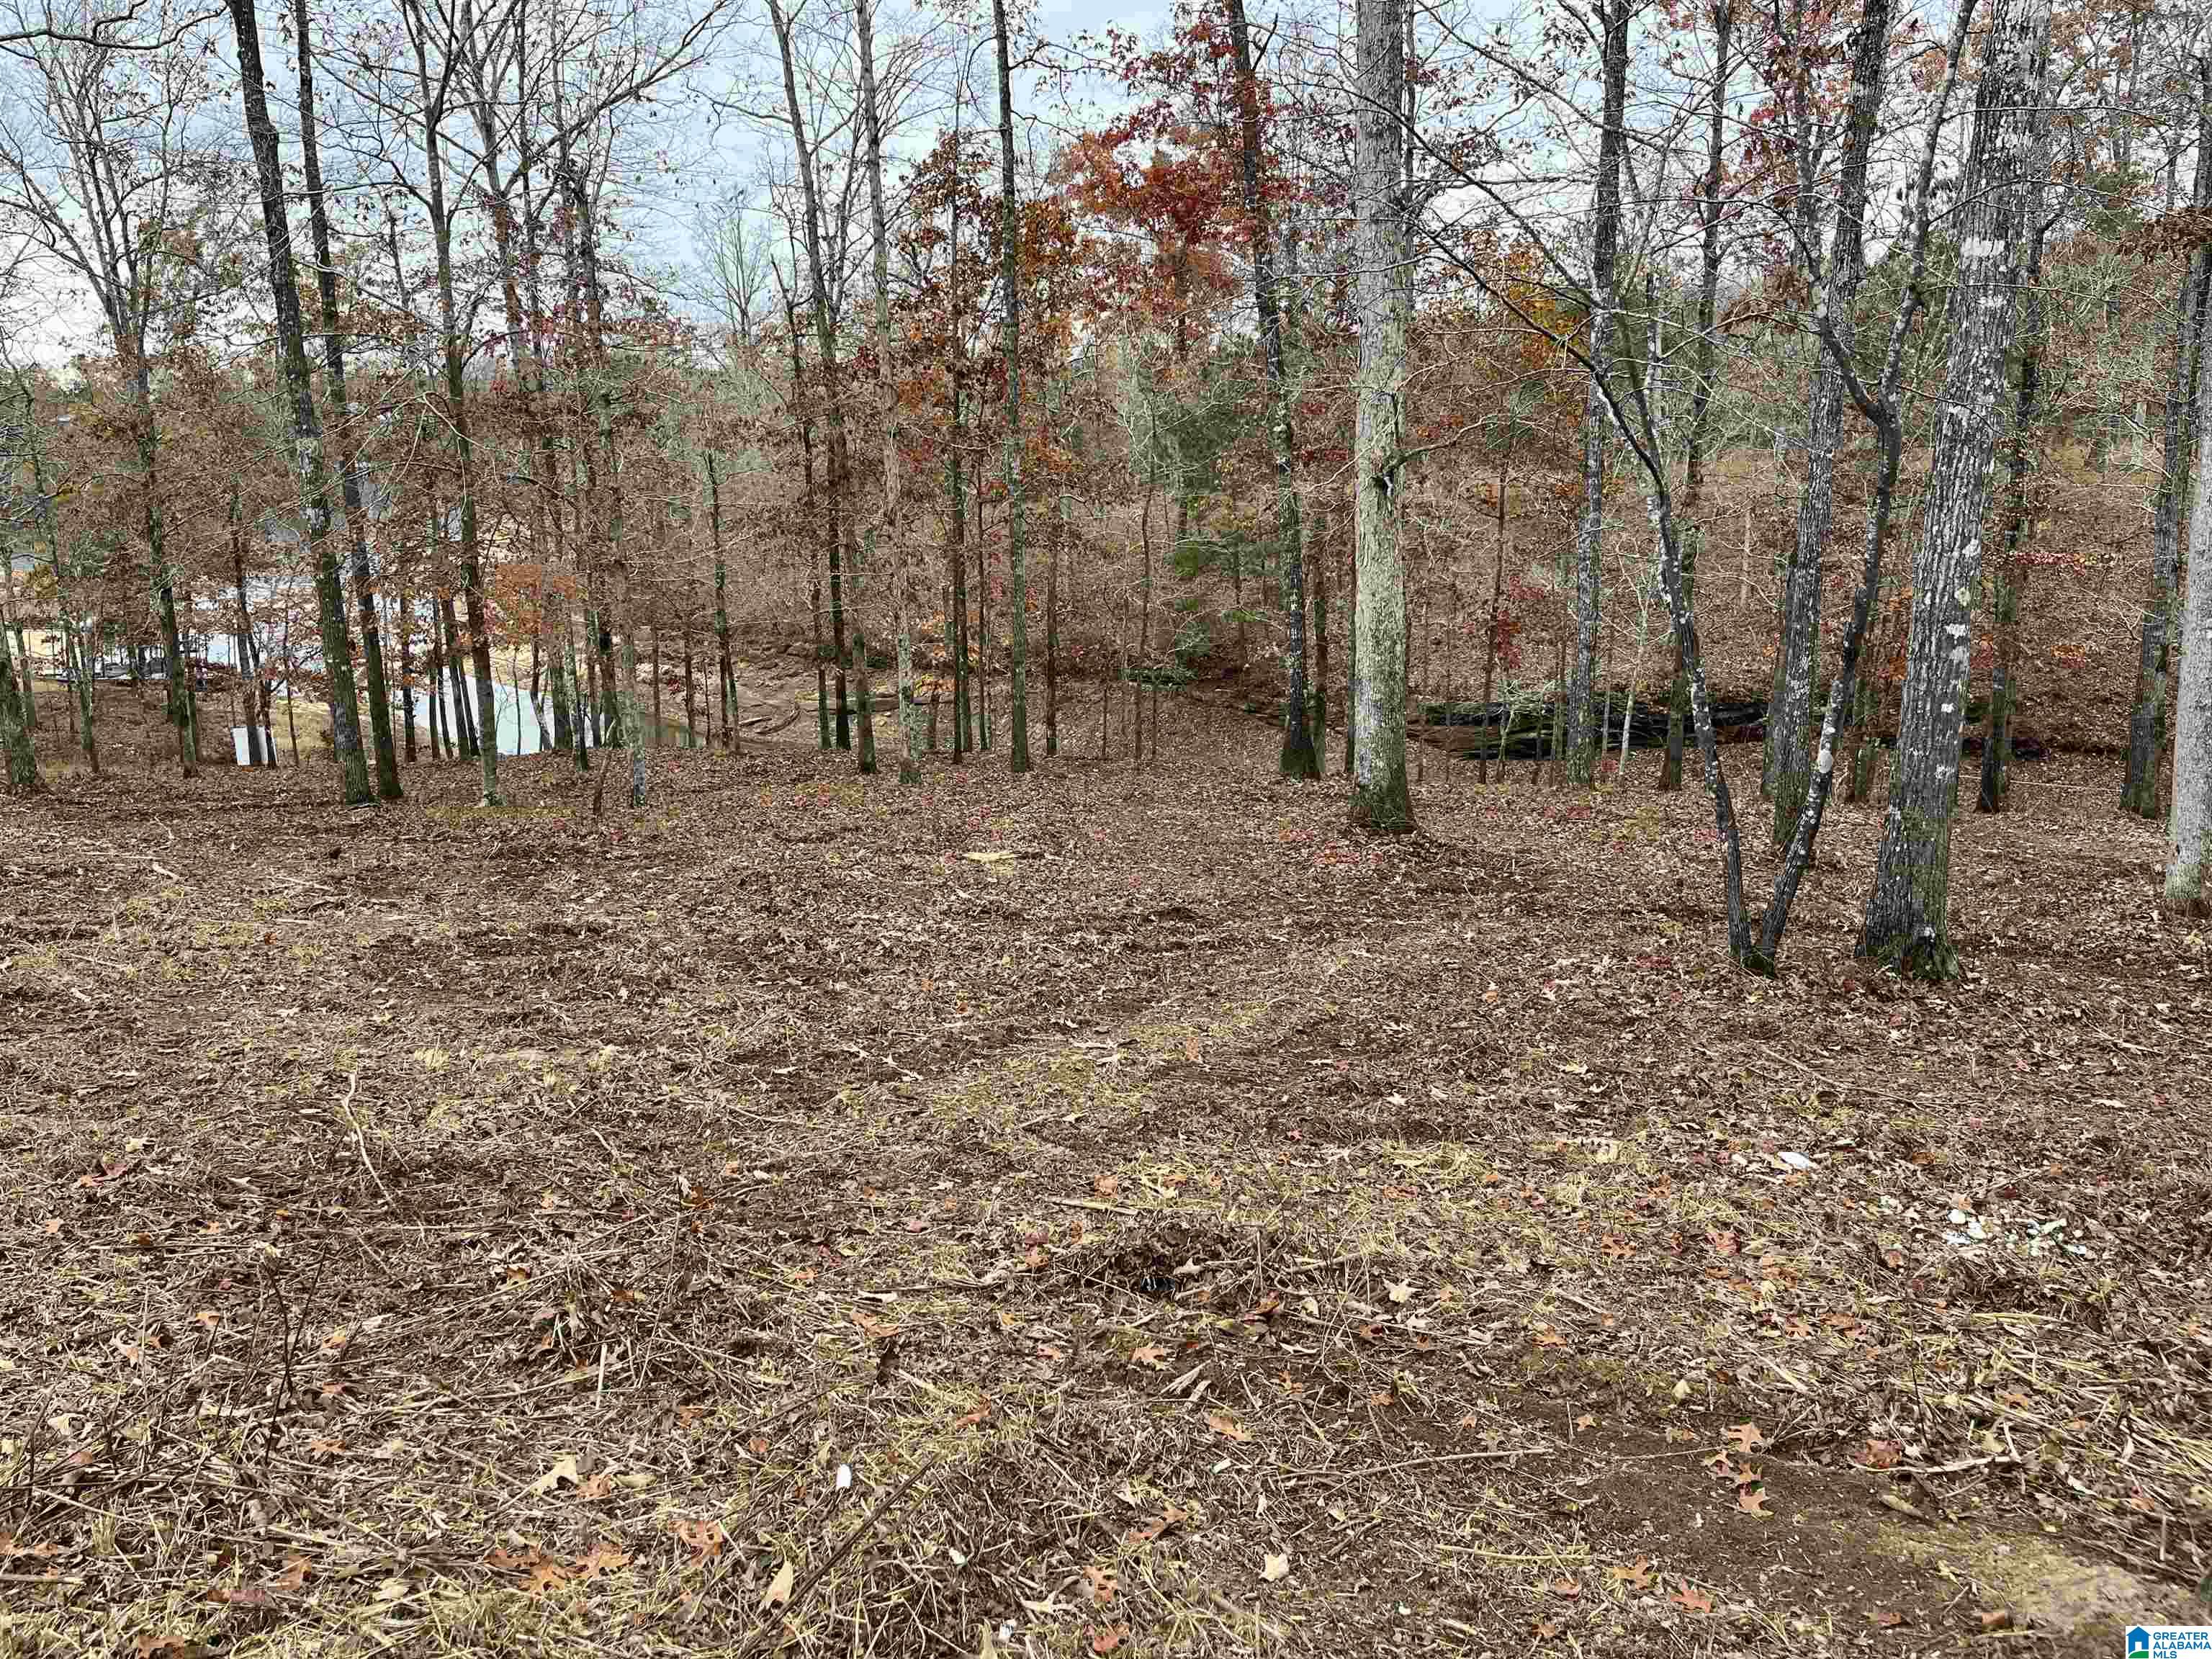 Lot 22/22A EDGEWATER BEND ROAD 22, DOUBLE SPRINGS, AL 35553